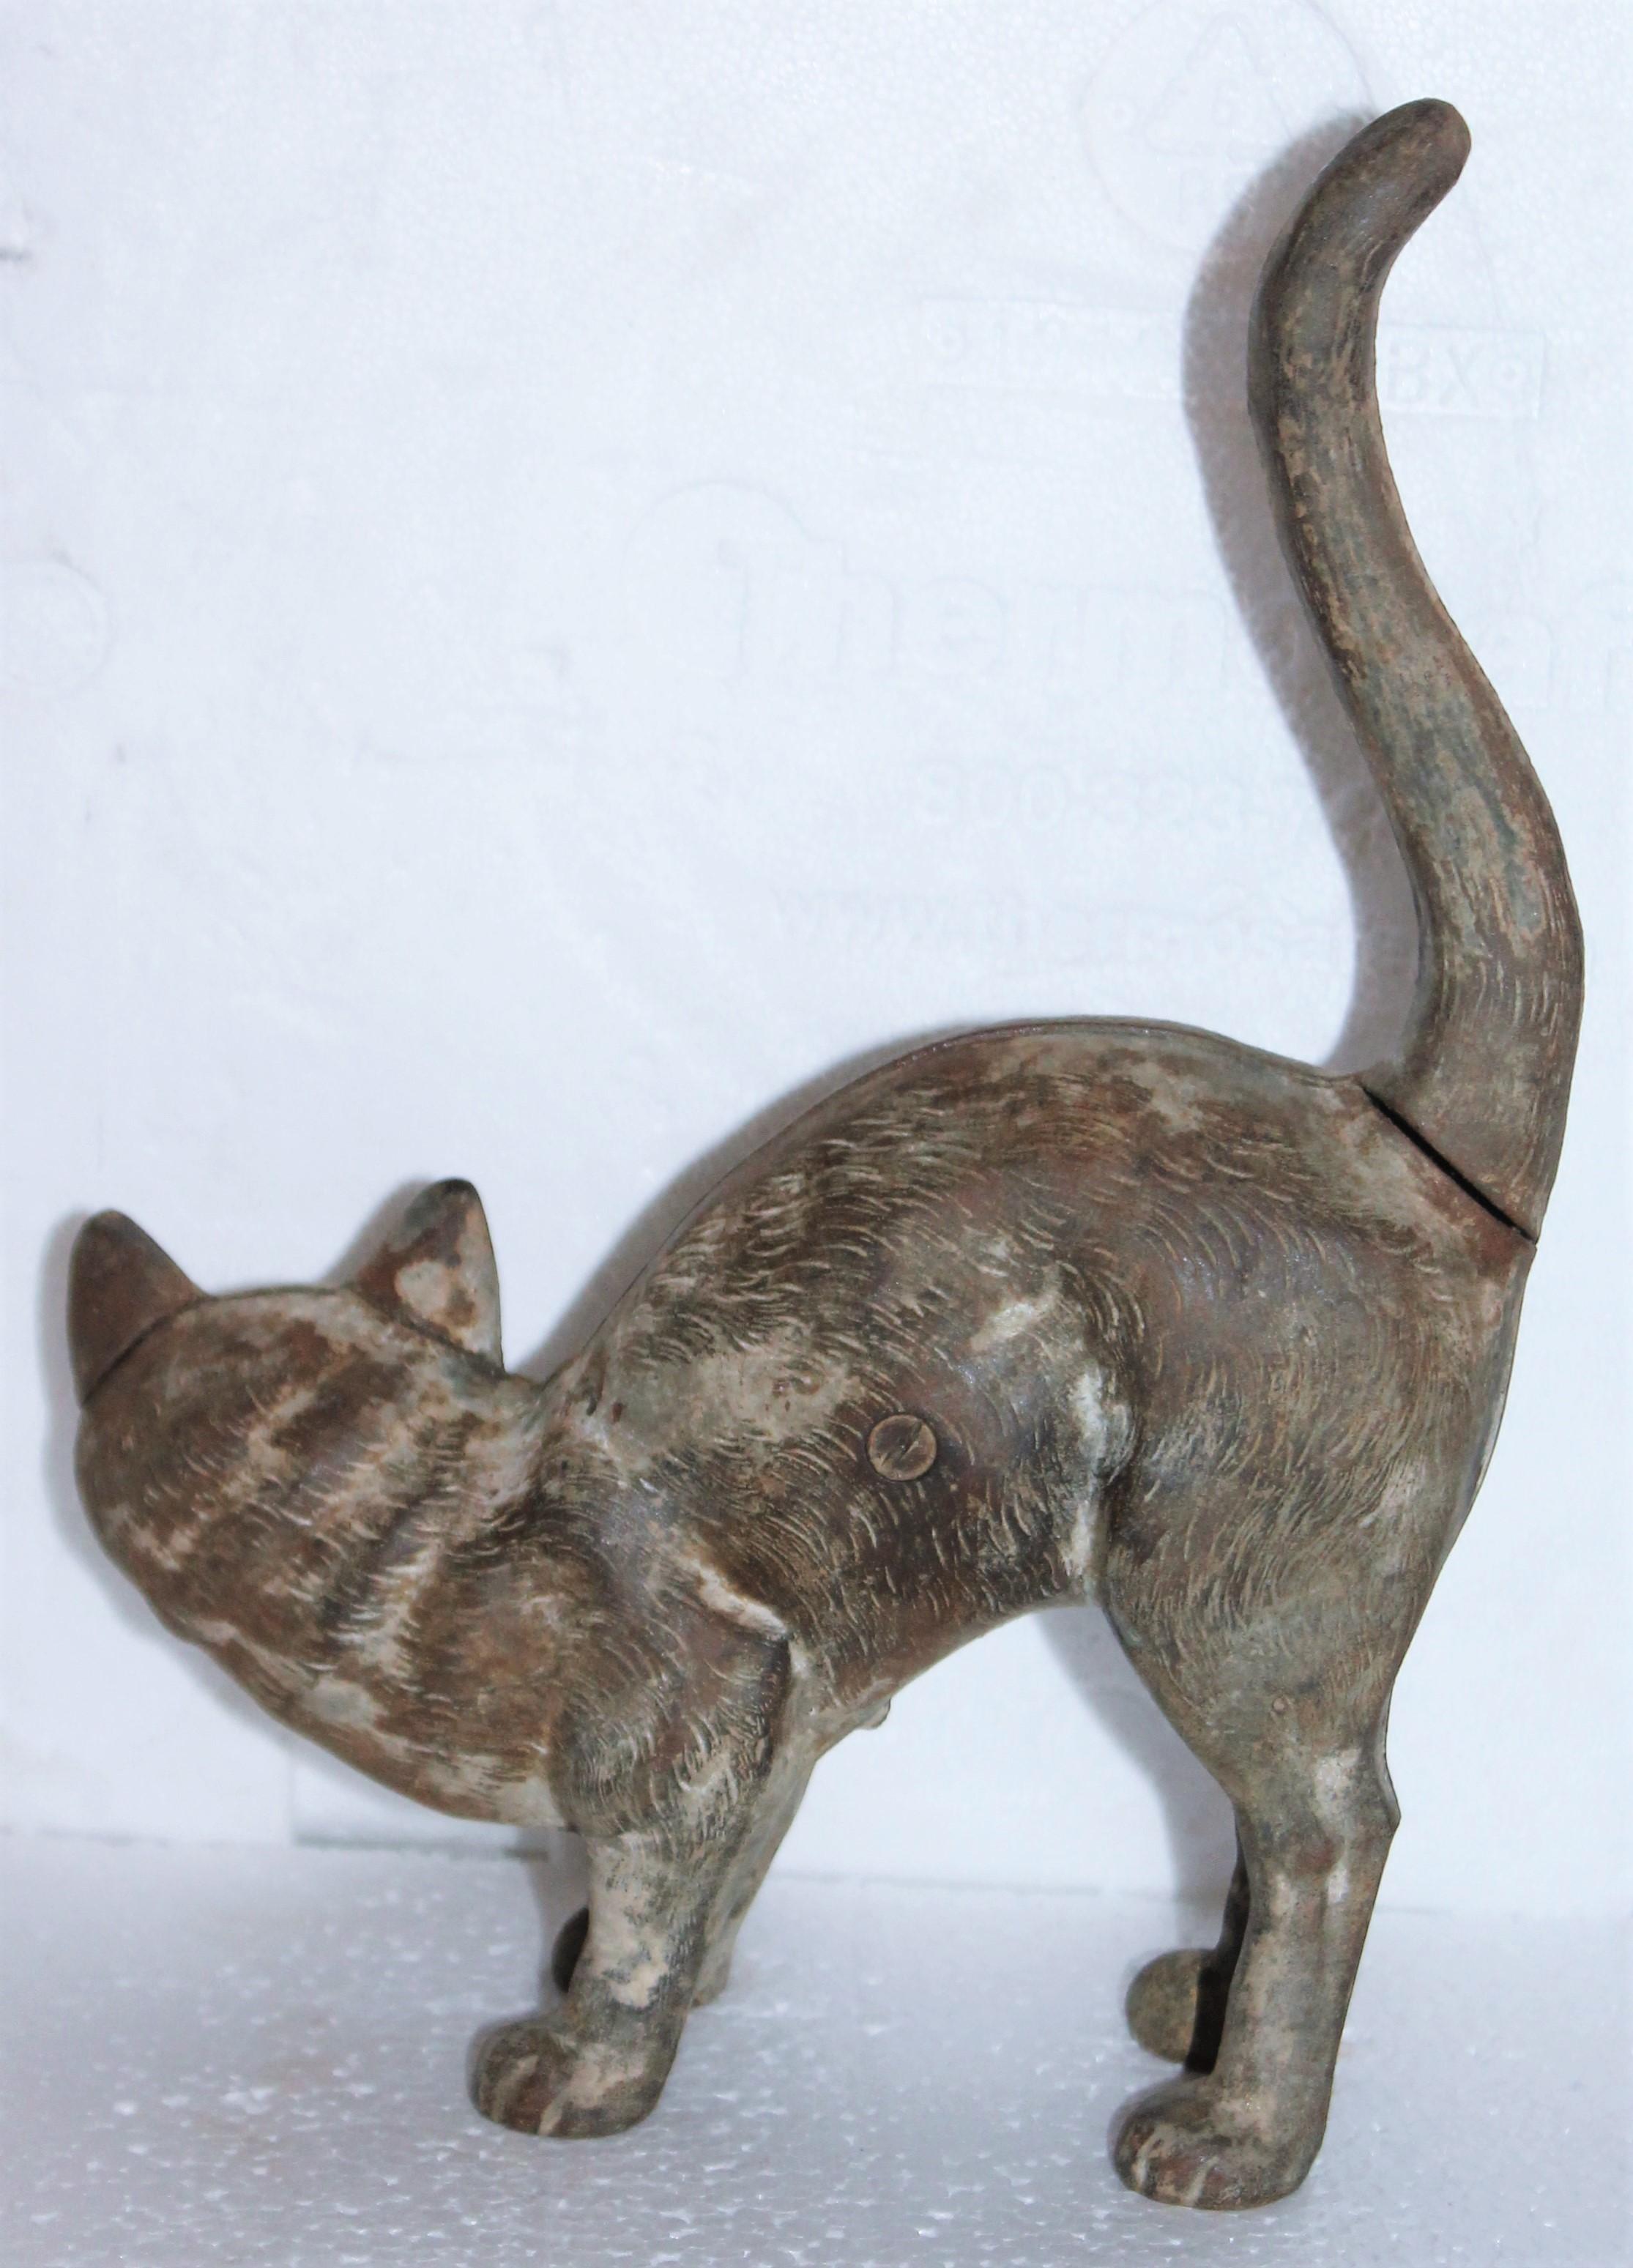 This folky cast iron cat door stop has a nice aged patinated surface. The condition is very good and it is a heavy doorstop.